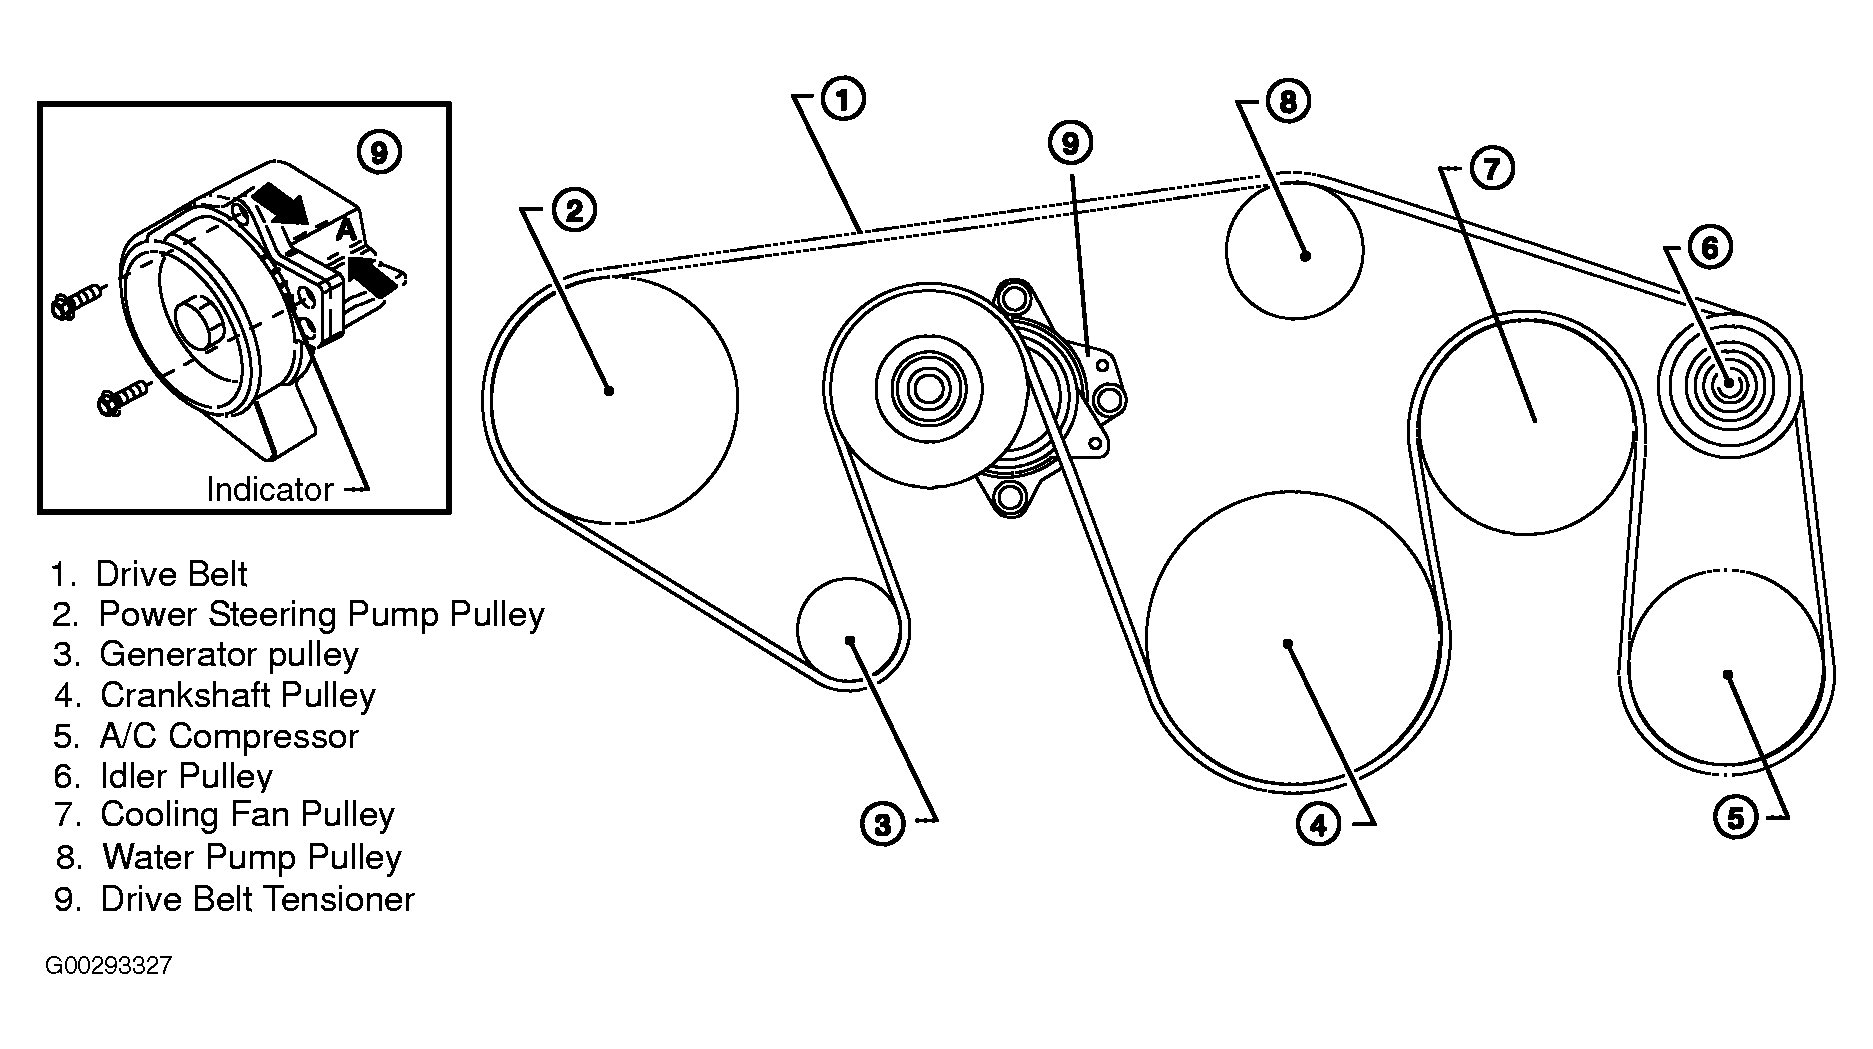 2004 Nissan Titan Serpentine Belt Routing and Timing Belt Diagrams